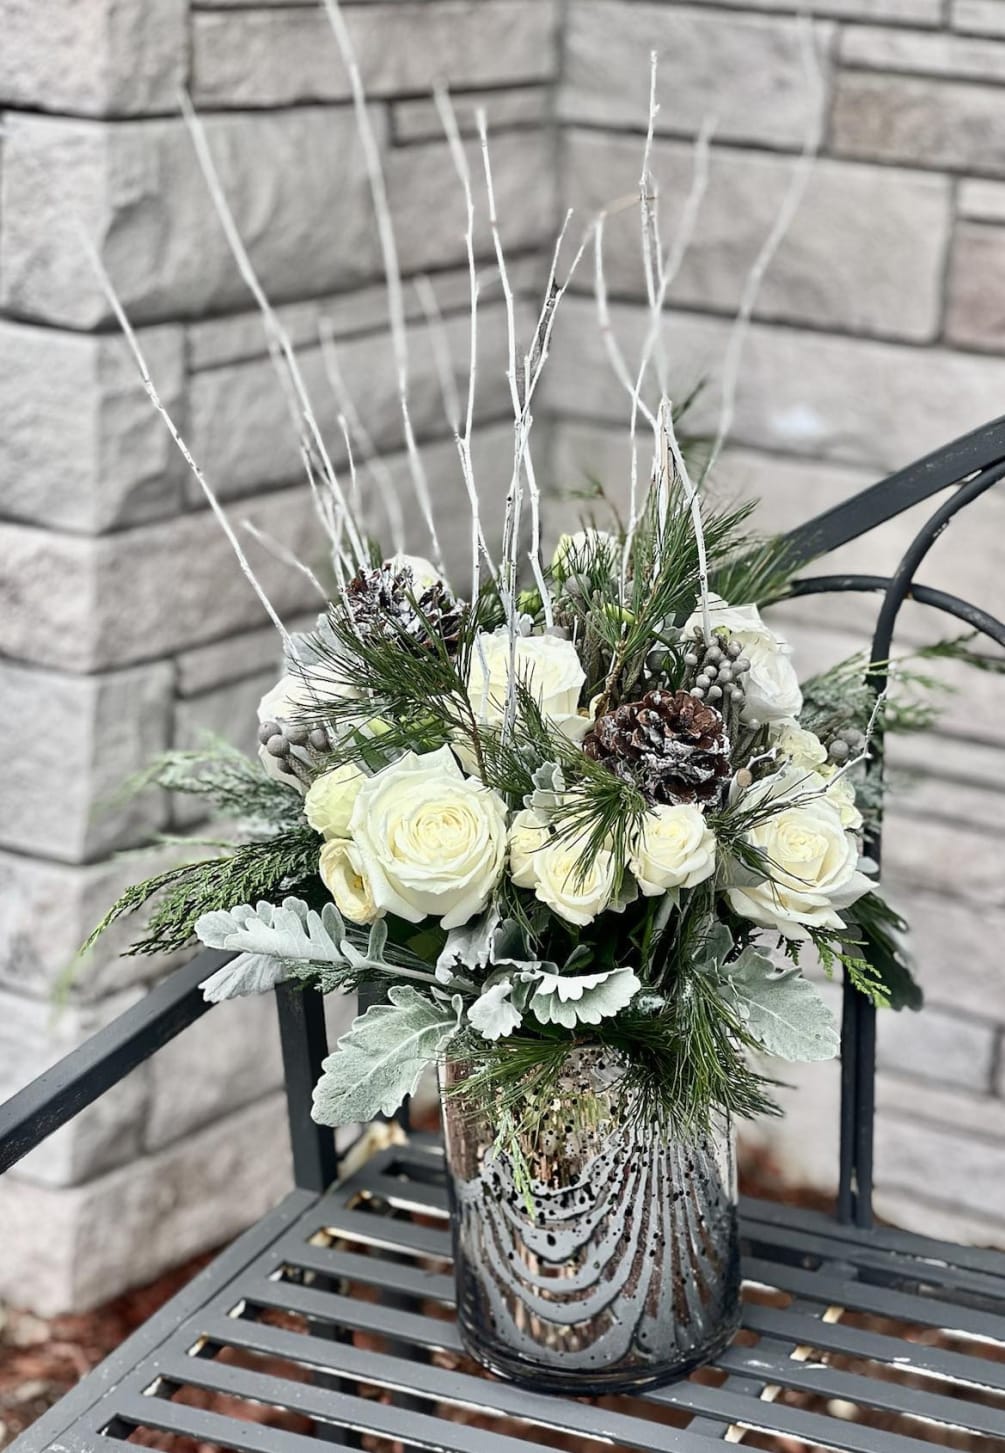 Dazzle them with a winter wonderland of blooms. Our beautiful arrangement captures